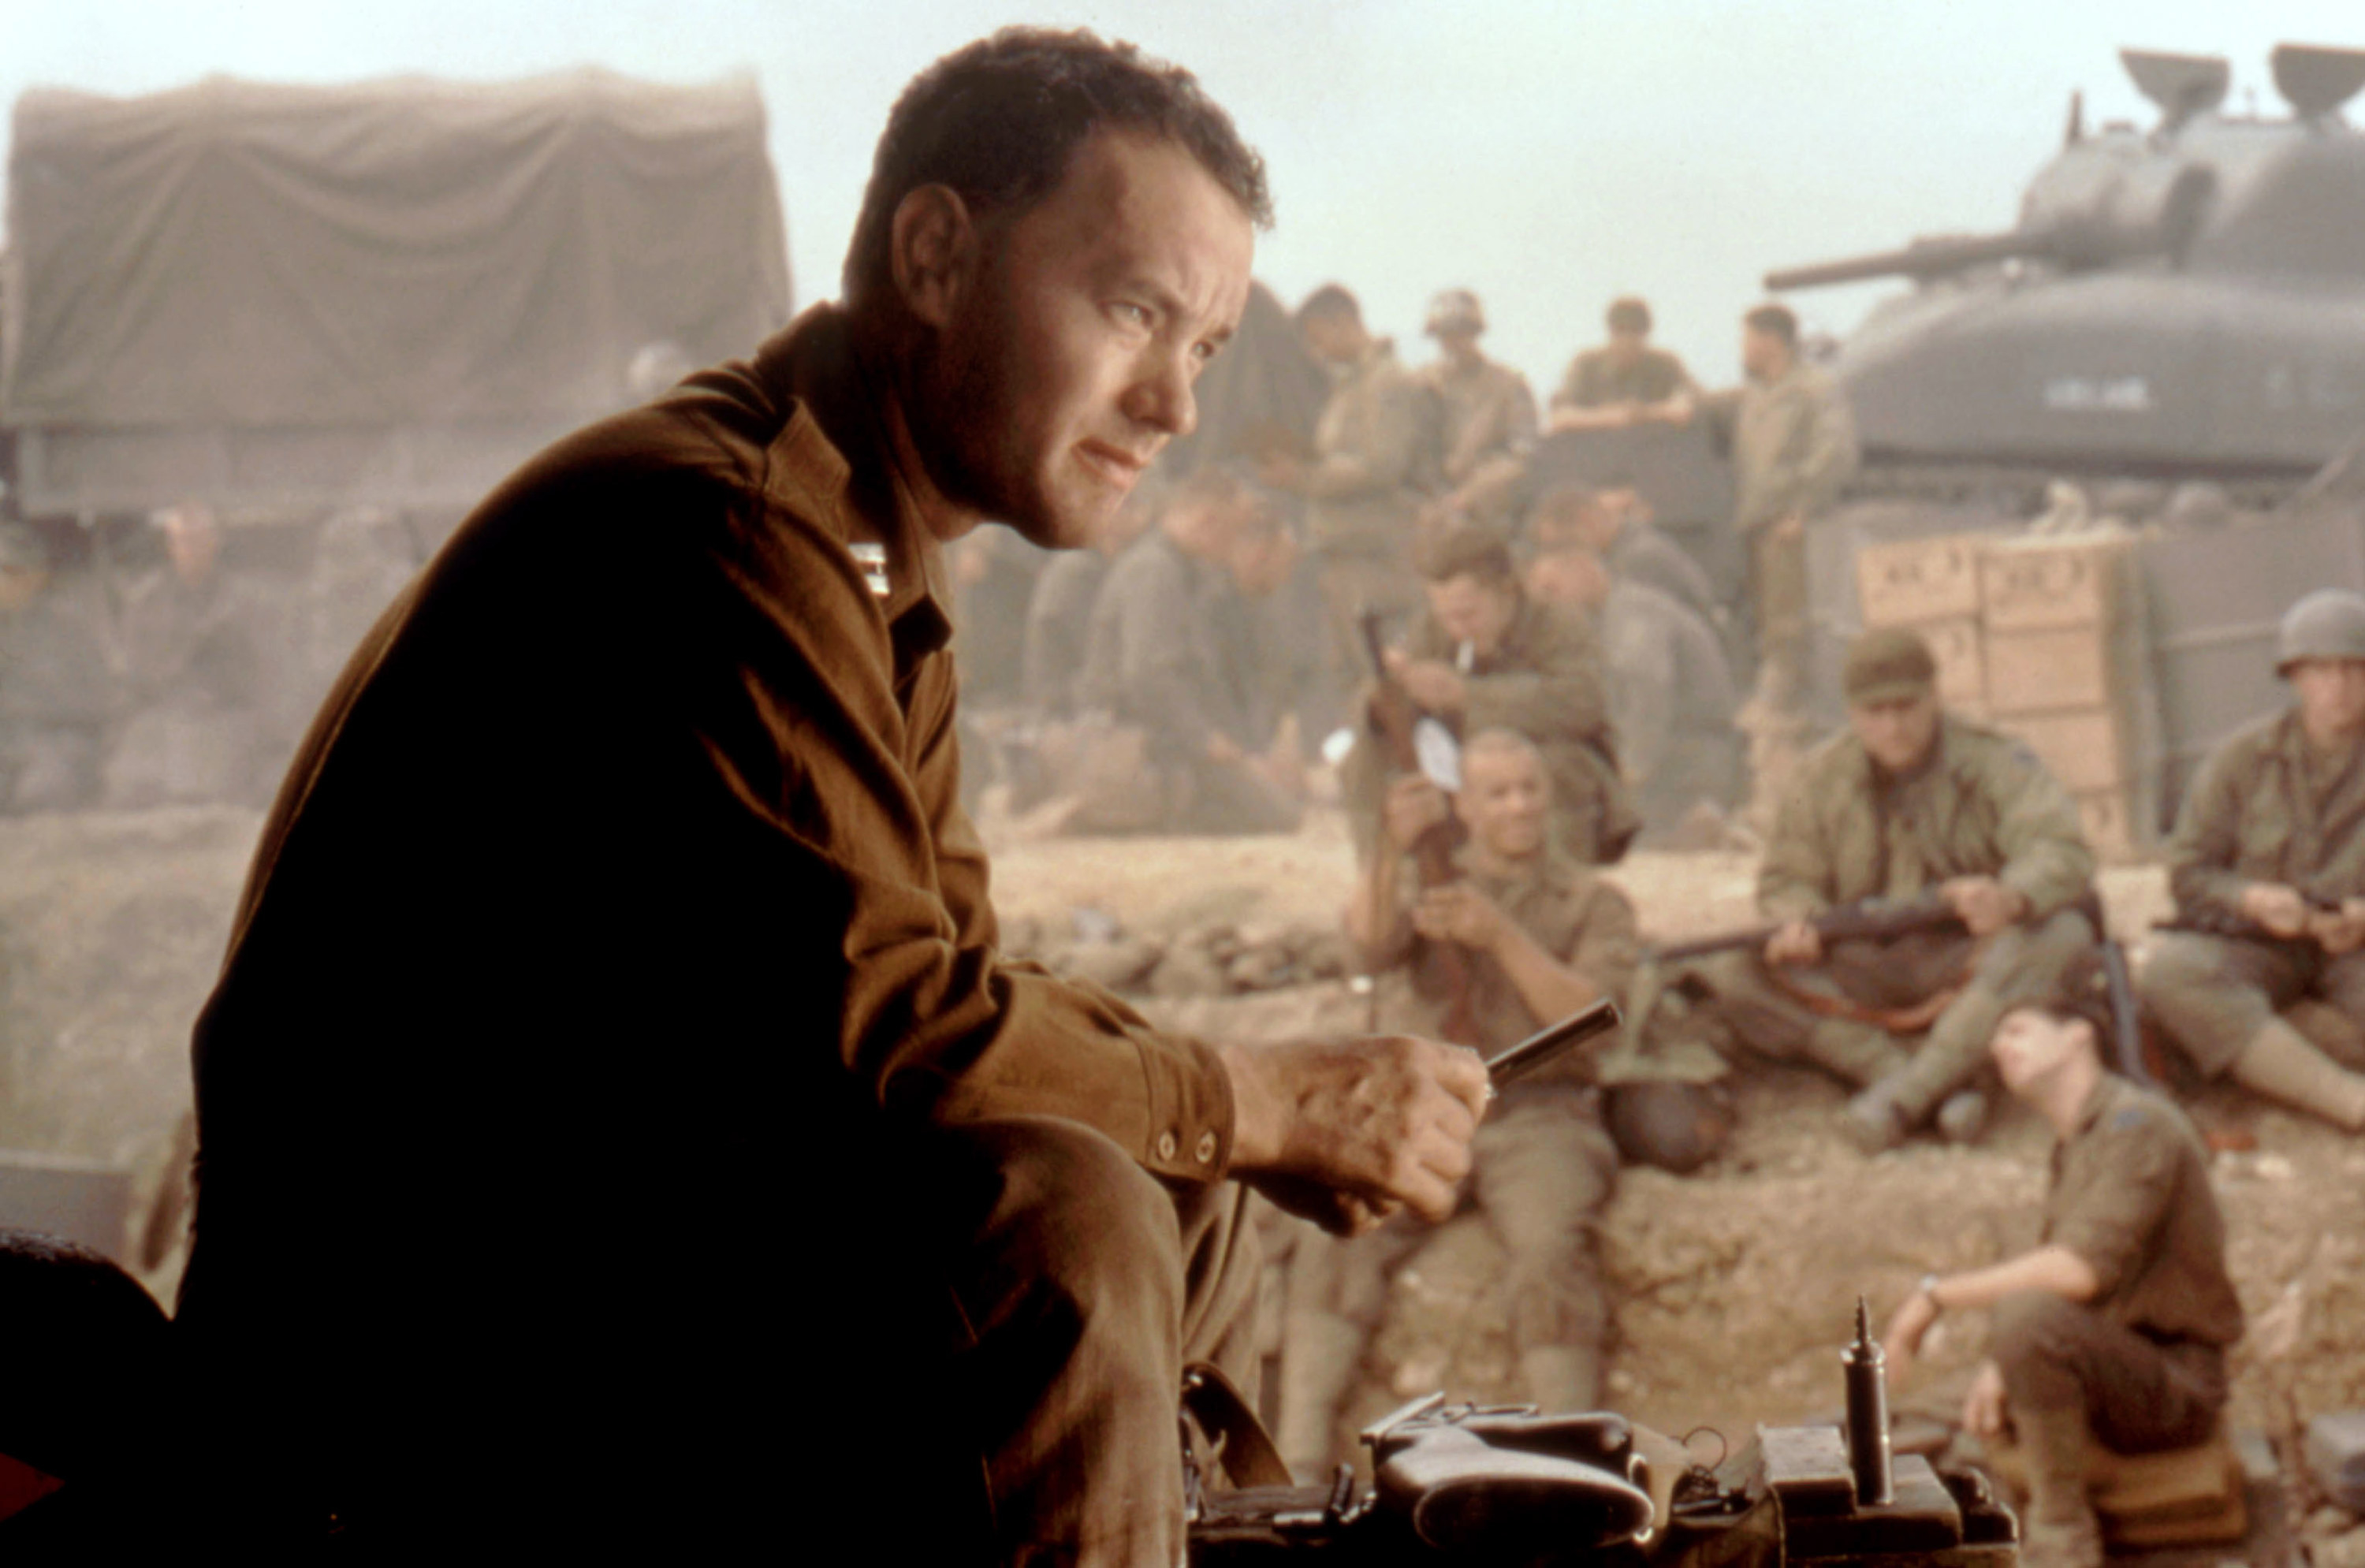 A man at war sits around with his fellow soldiers